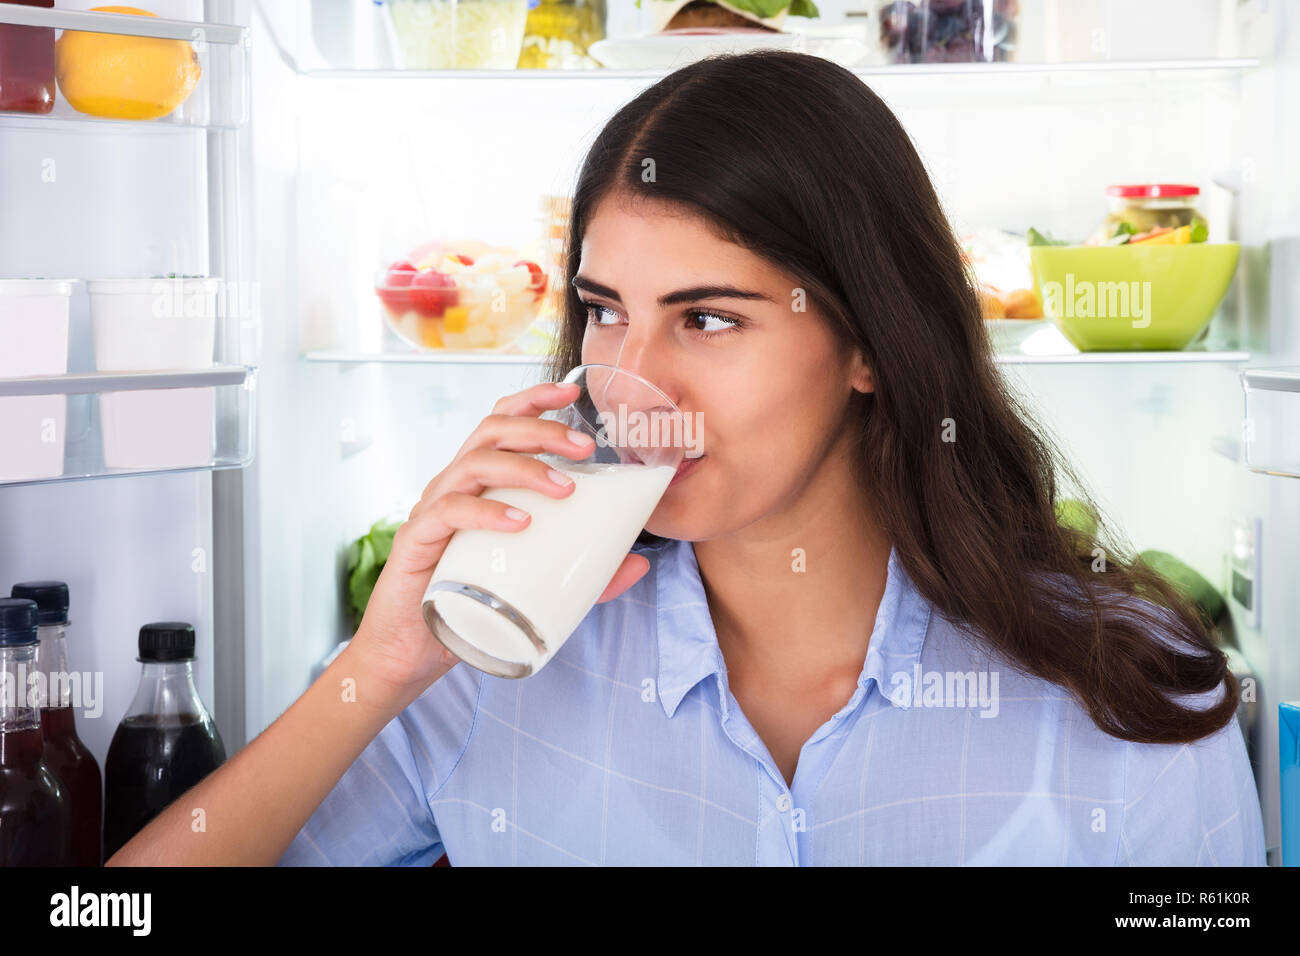 Young Woman Holding Glass Of Milk Stock Photo